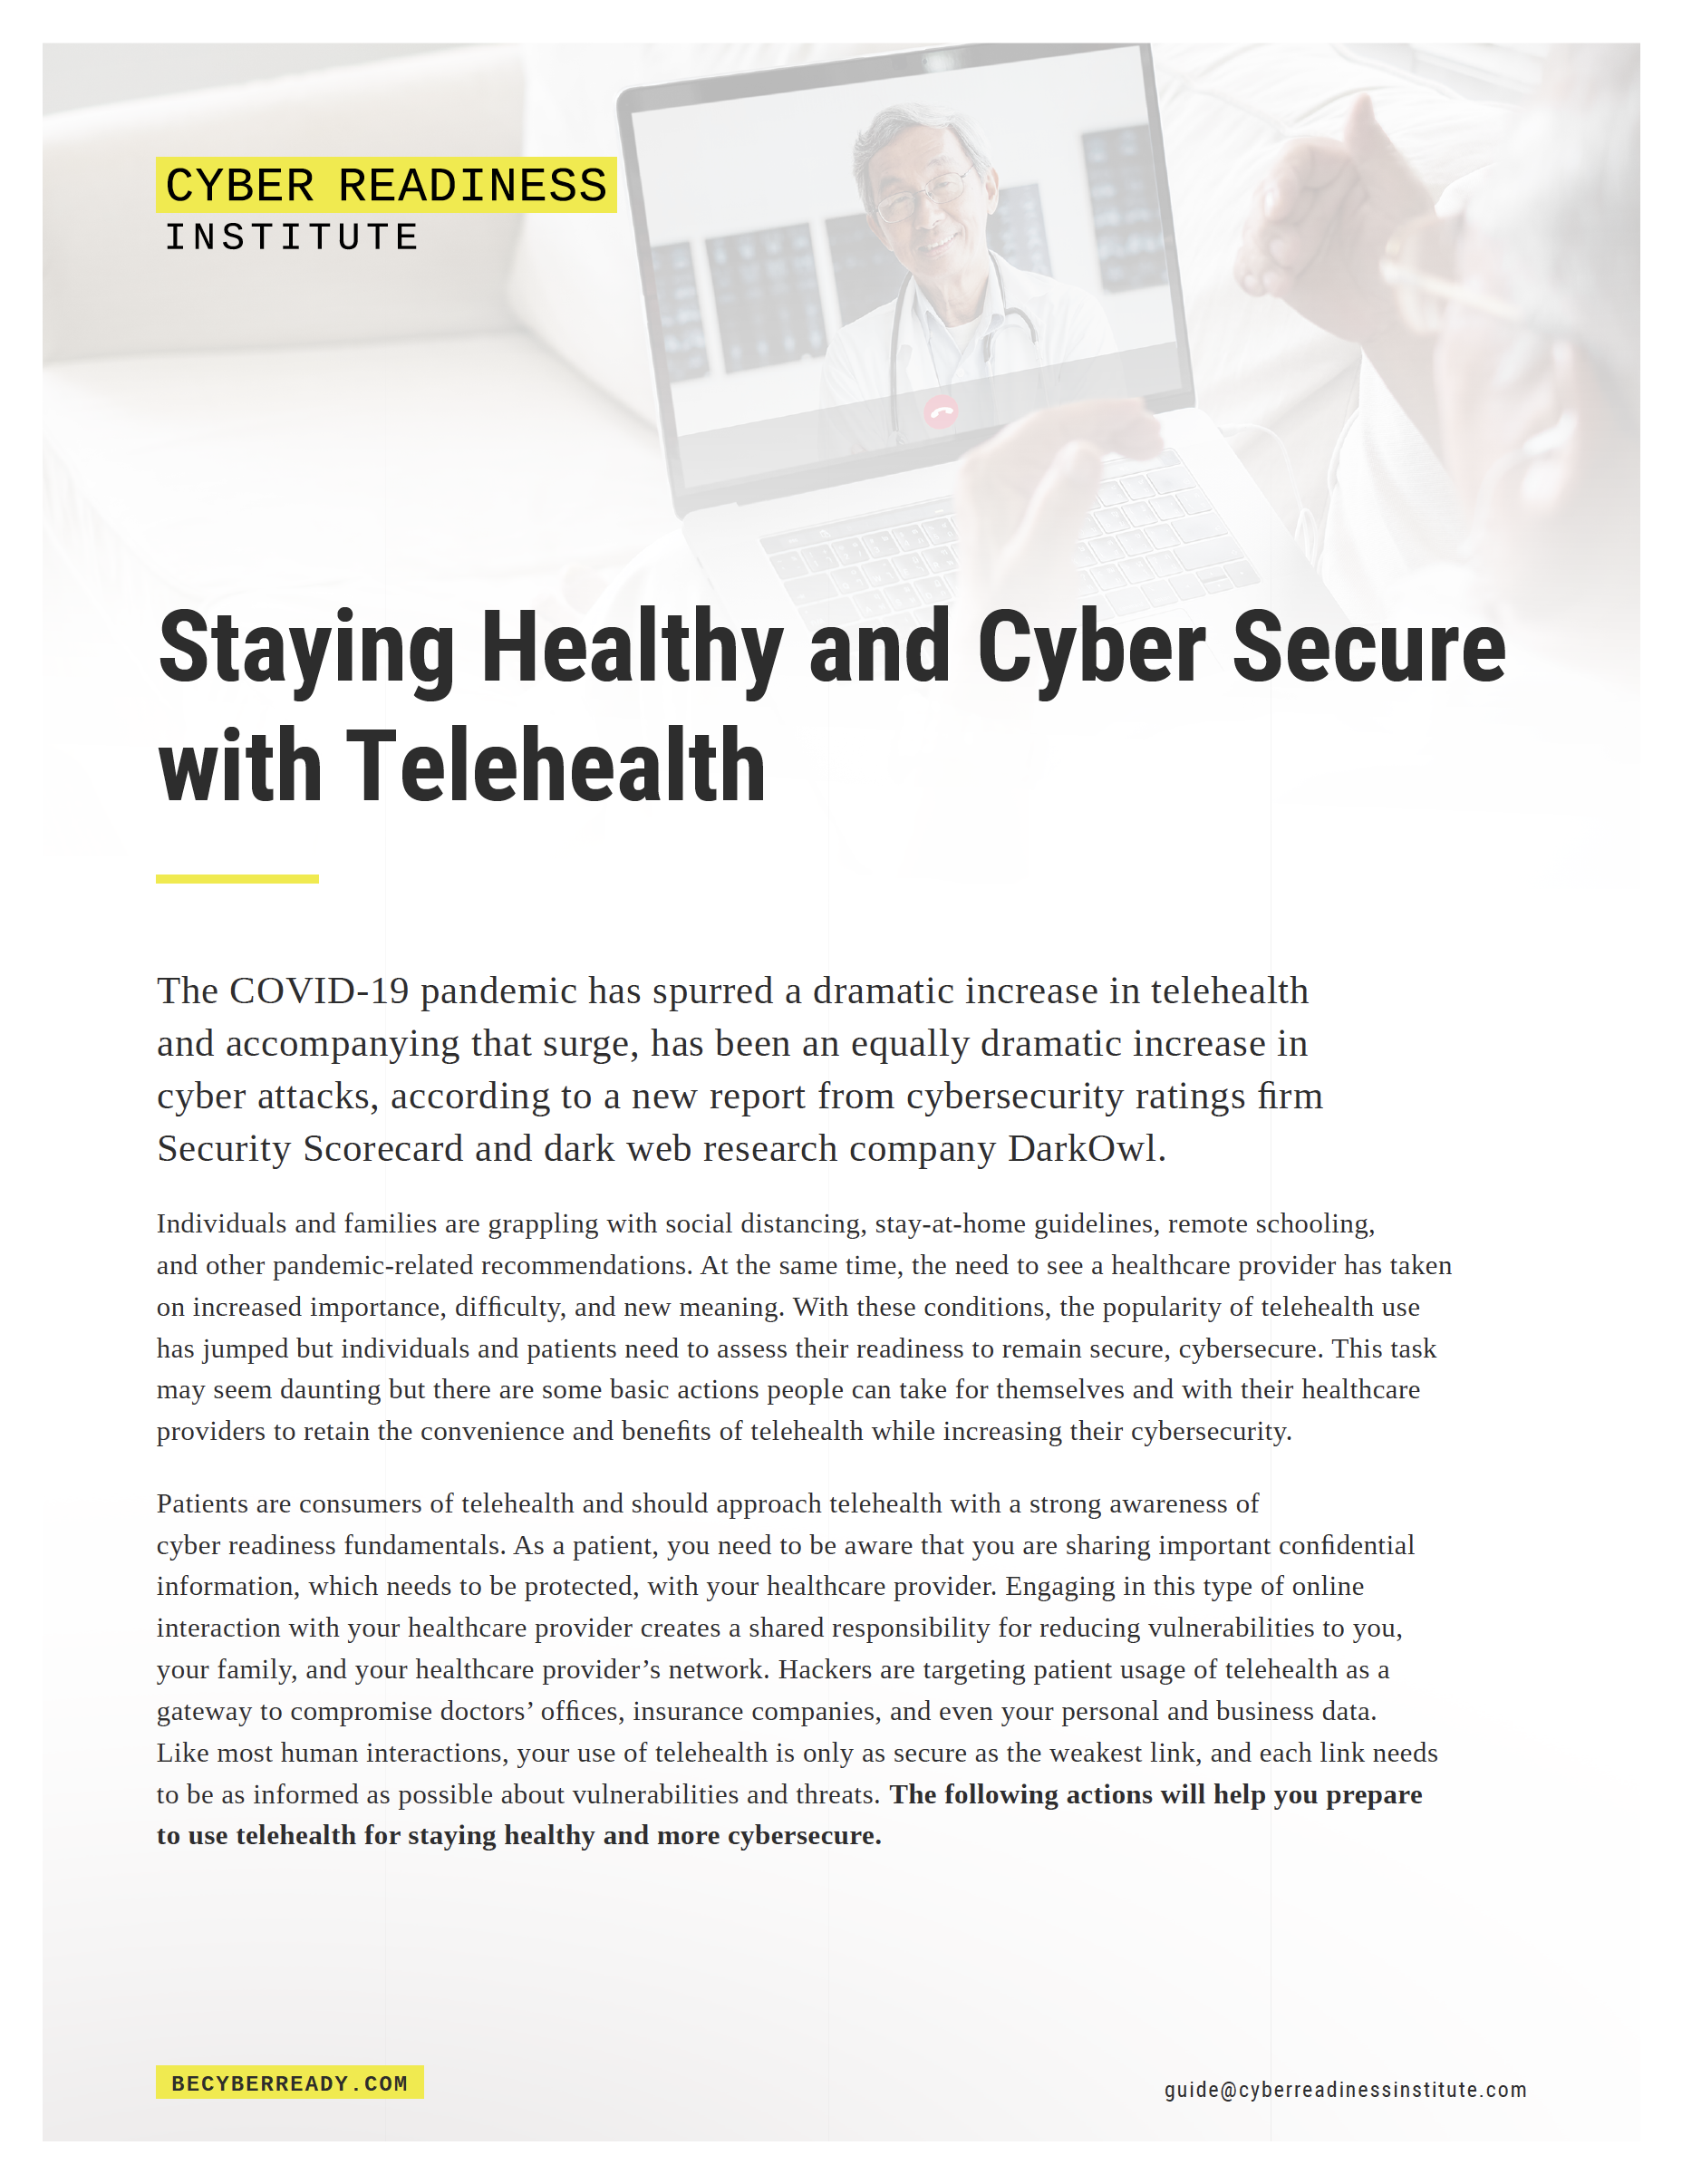 Staying Healthy and Cyber Secure with Telehealth cover